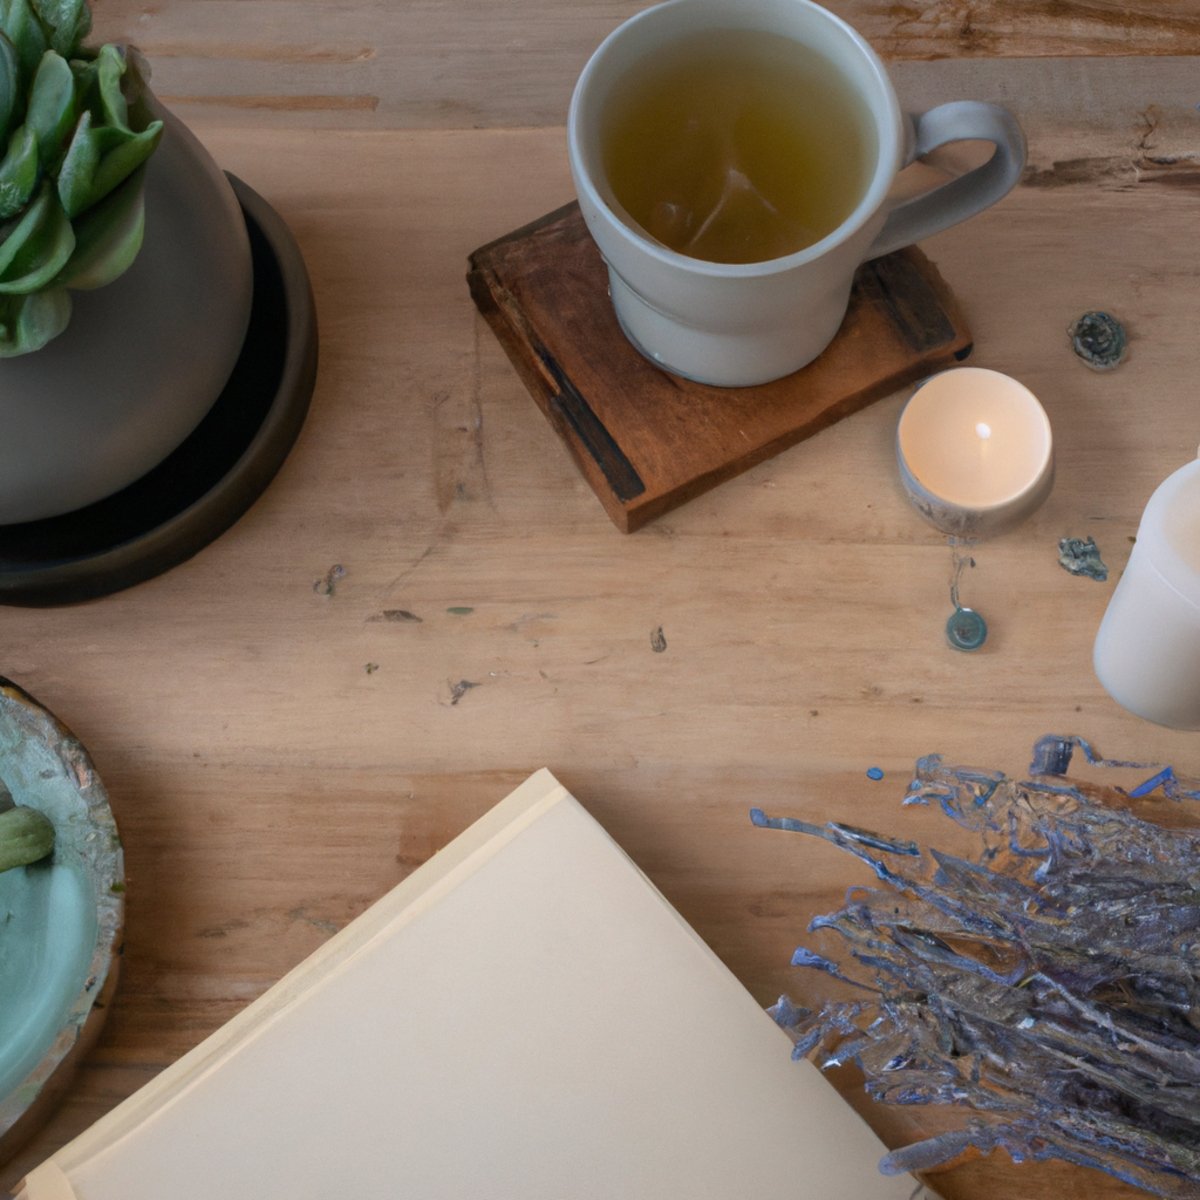 A calming scene of a wooden table with tea, book, succulent, and candle, inviting self-care and stress relief.